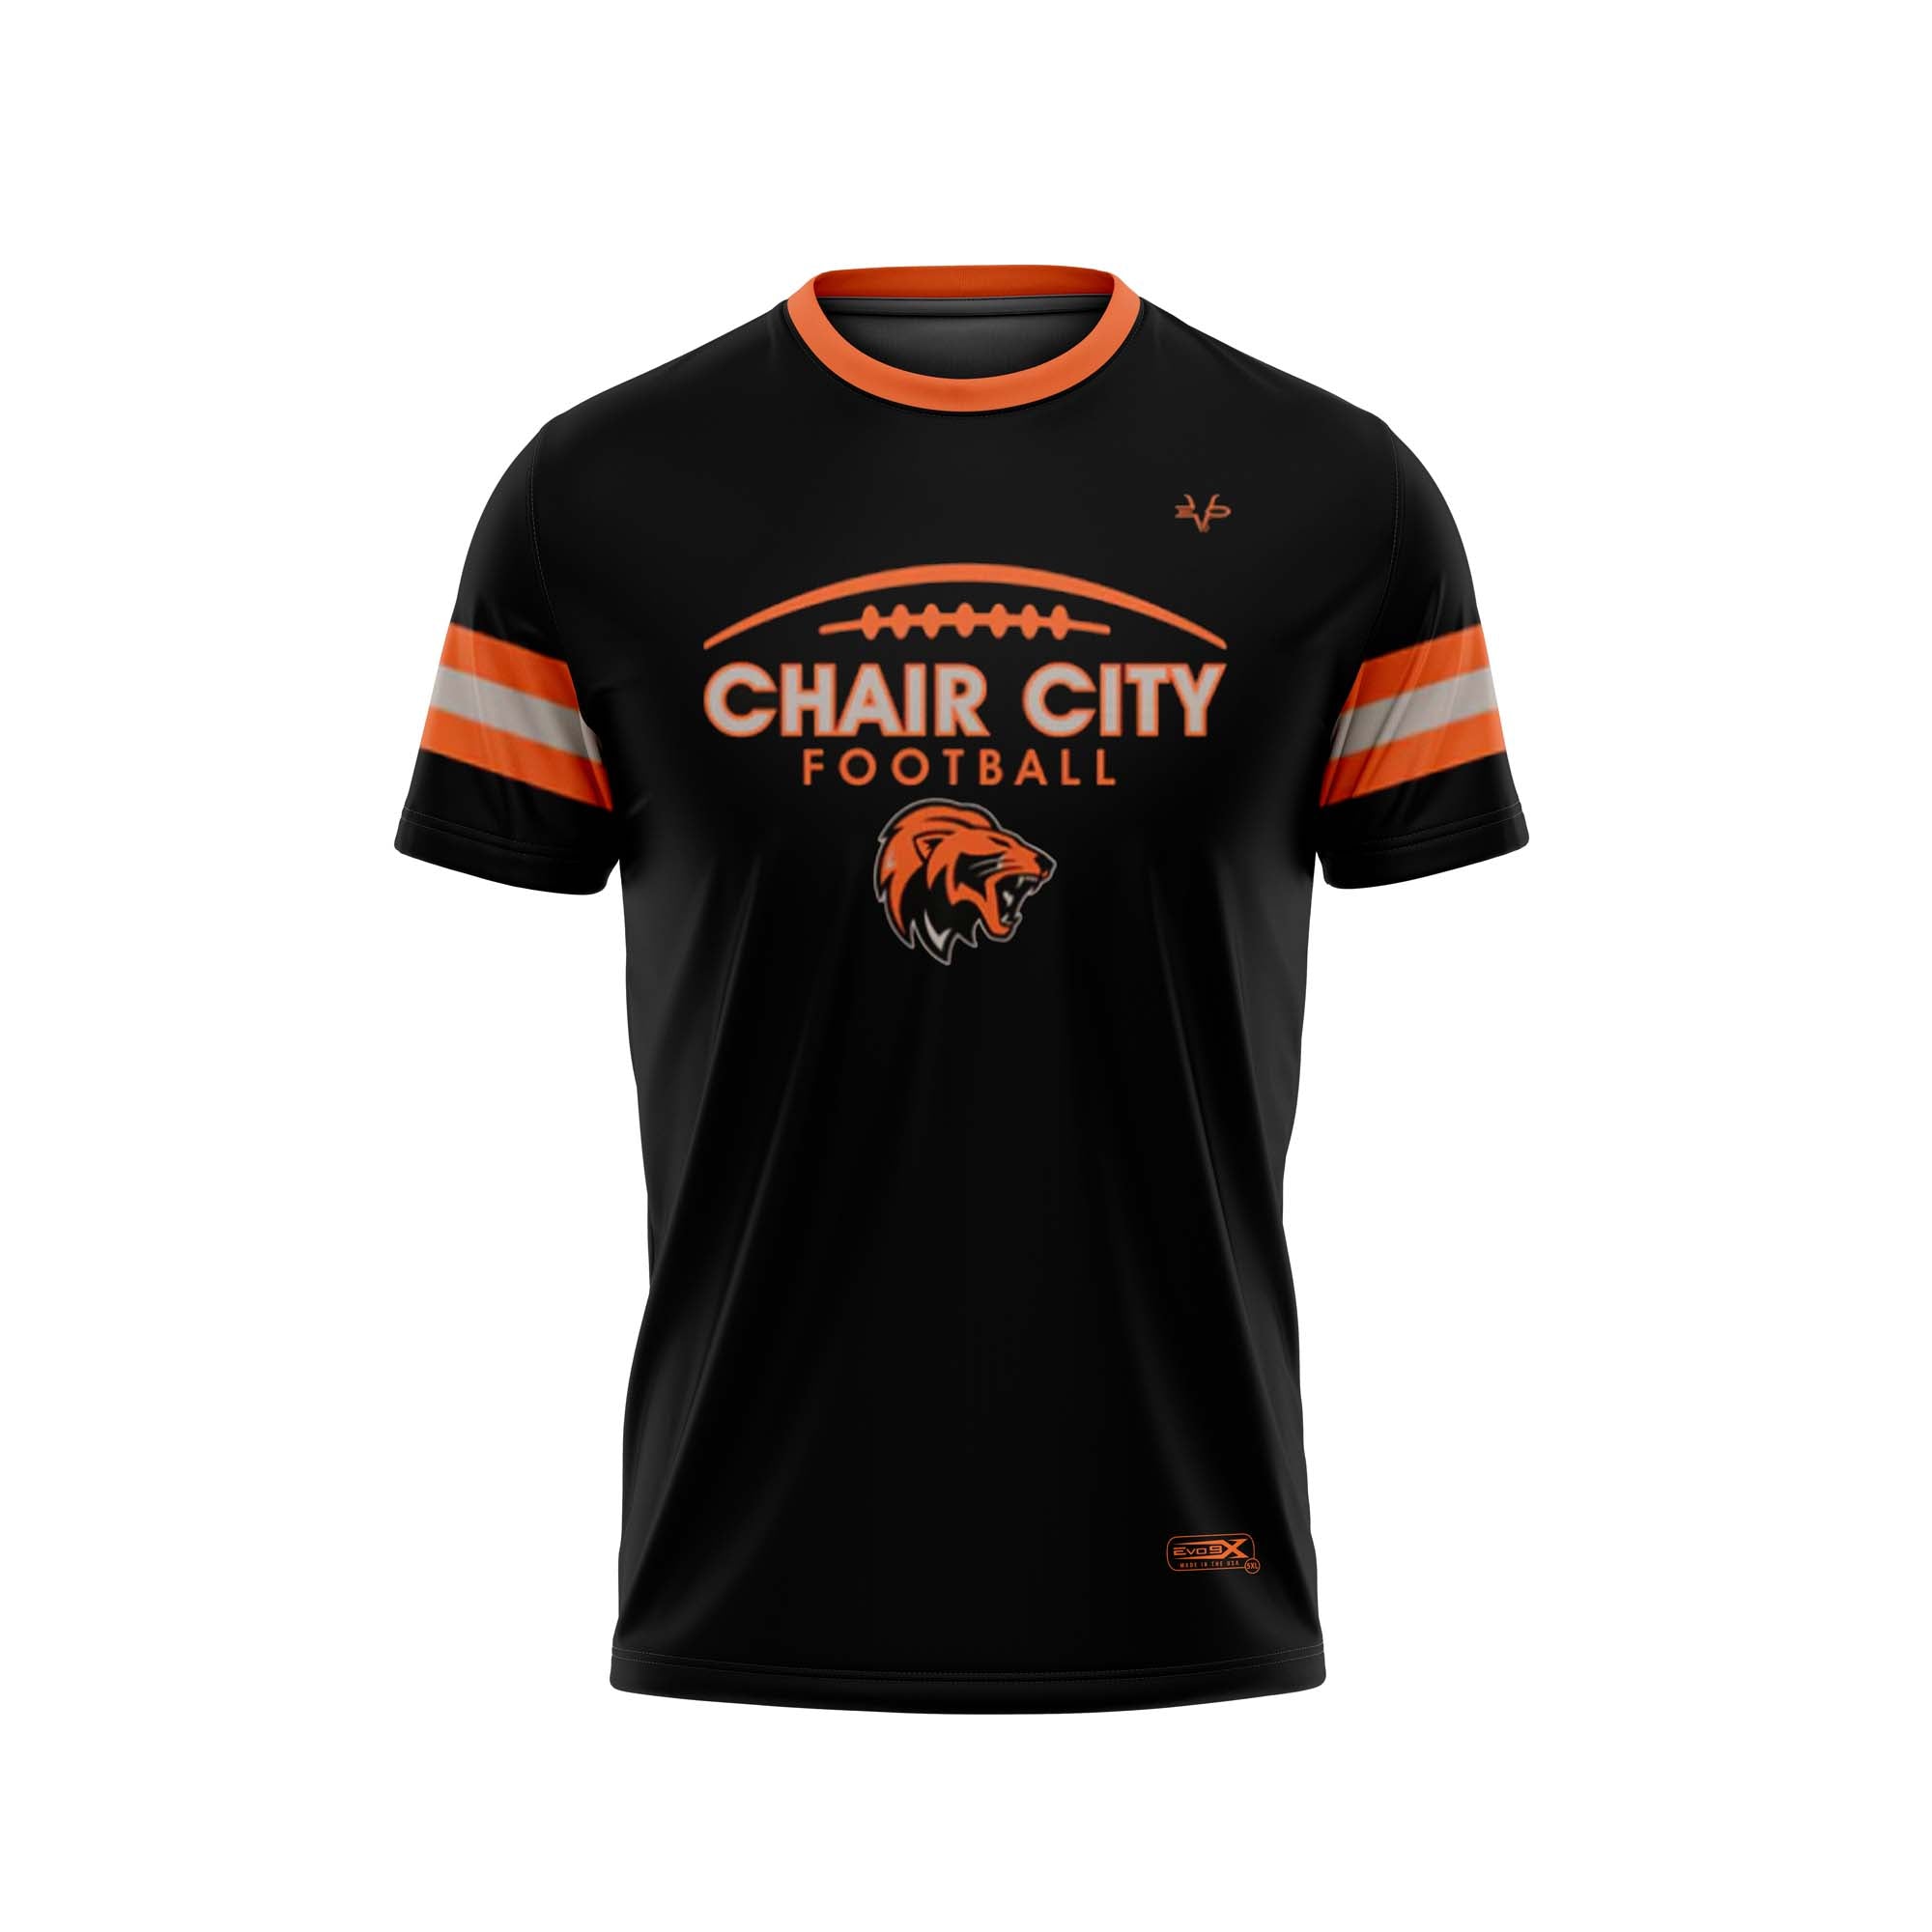 CHAIR CITY FOOTBALL Sublimated Crew Neck Jersey